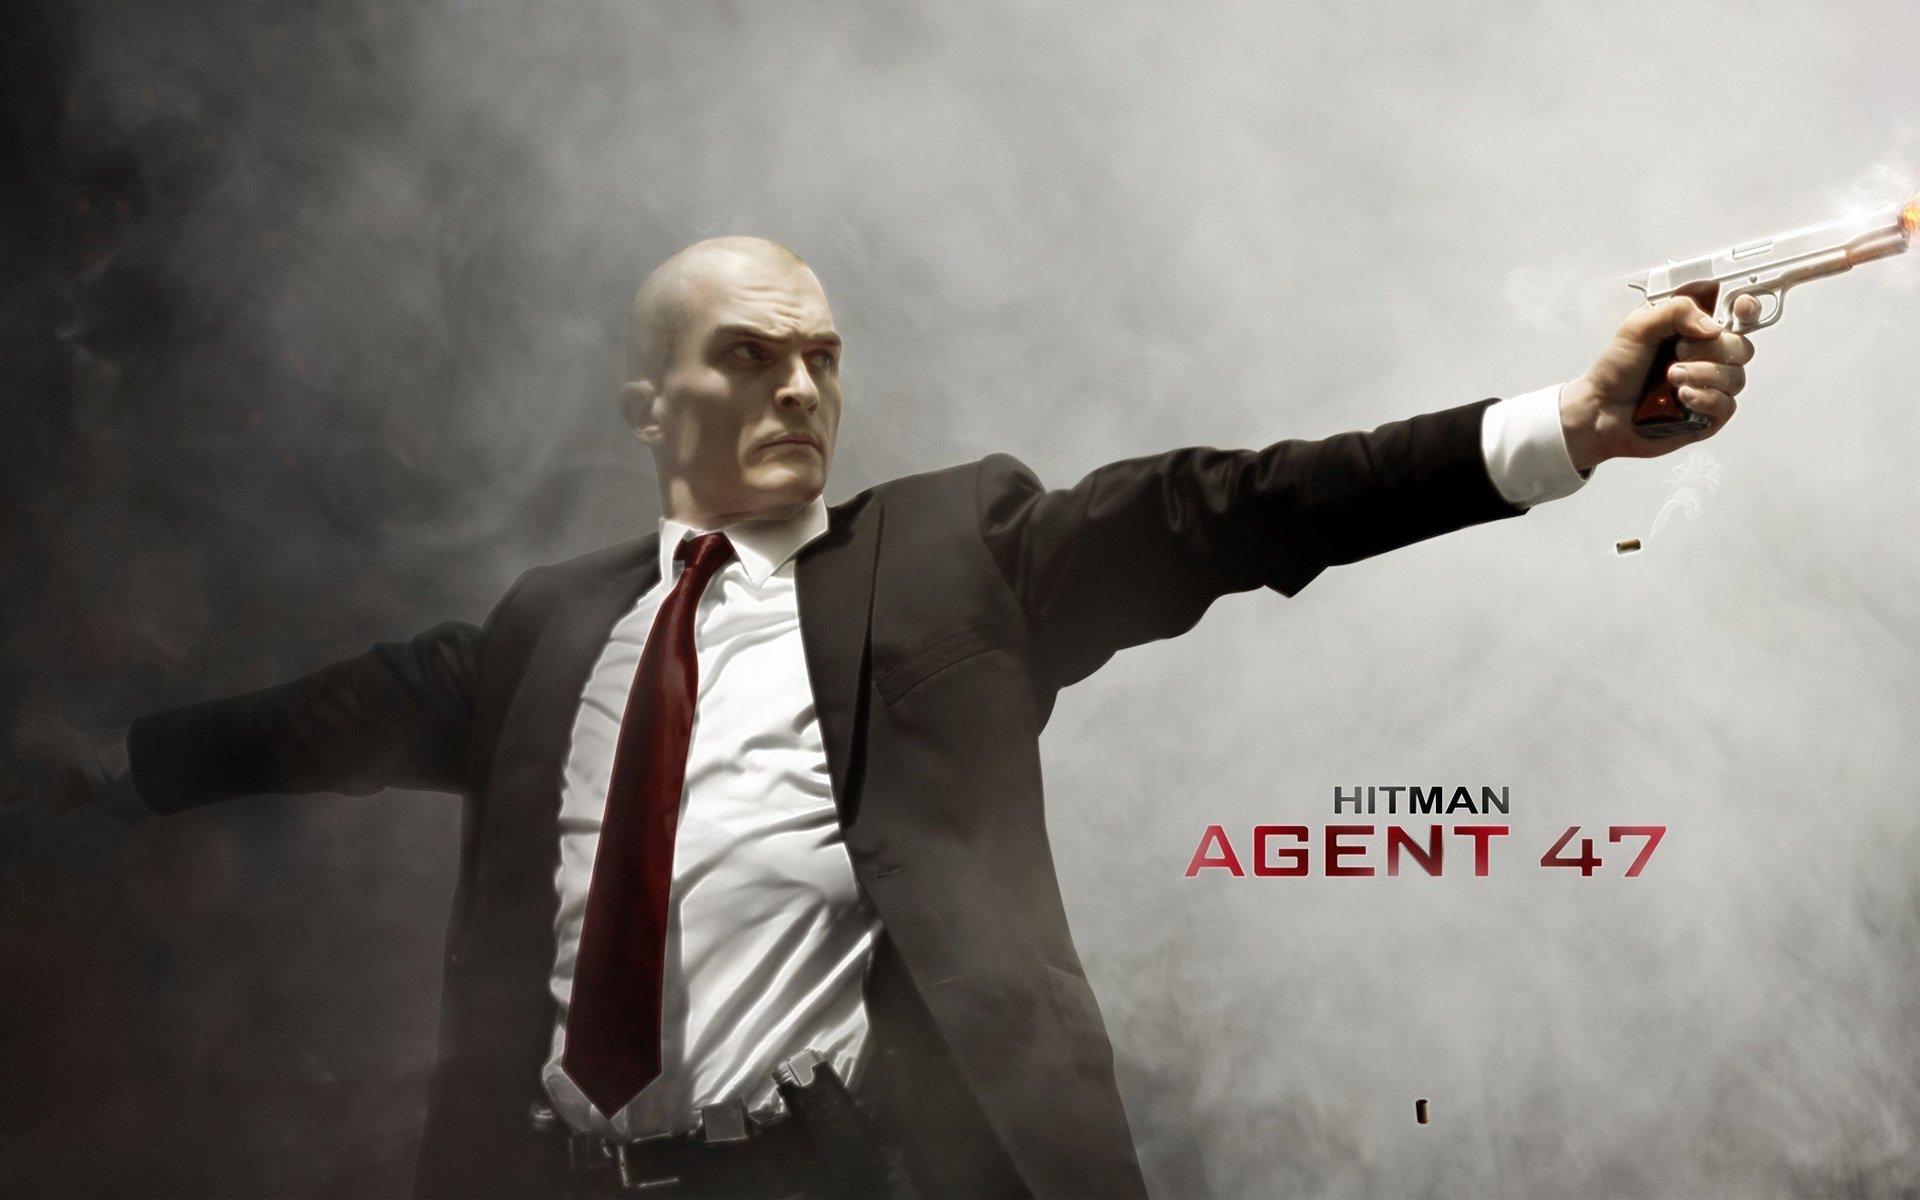 Hitman: Agent 47 Wallpaper and Background Image